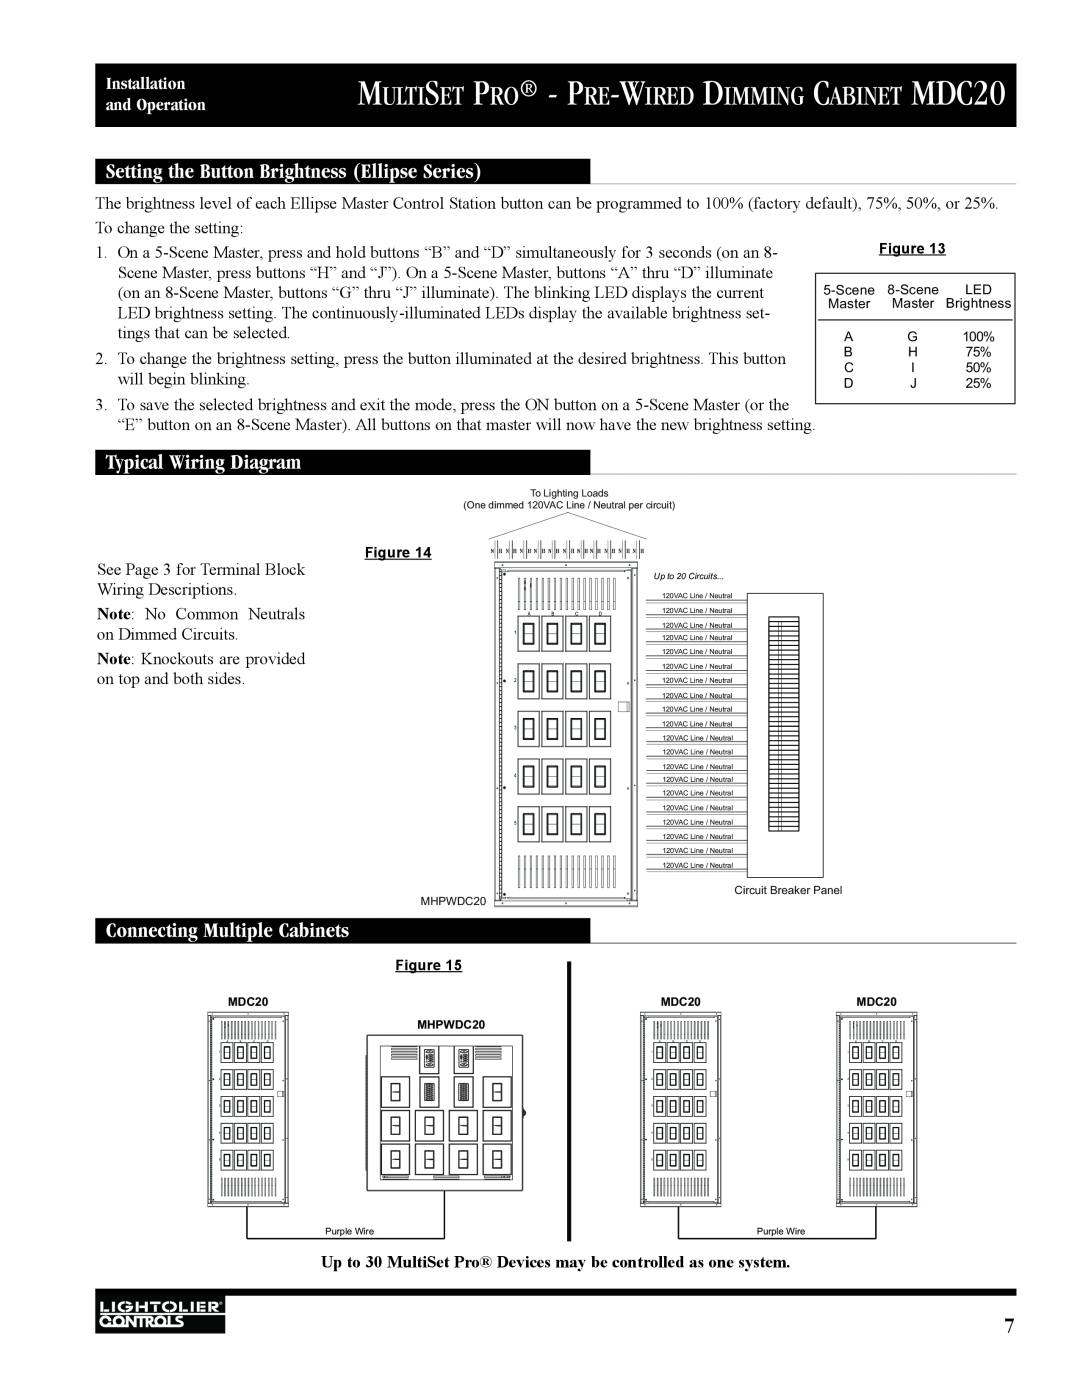 Lightolier MDC20 manual Setting the Button Brightness Ellipse Series, Typical Wiring Diagram, Connecting Multiple Cabinets 